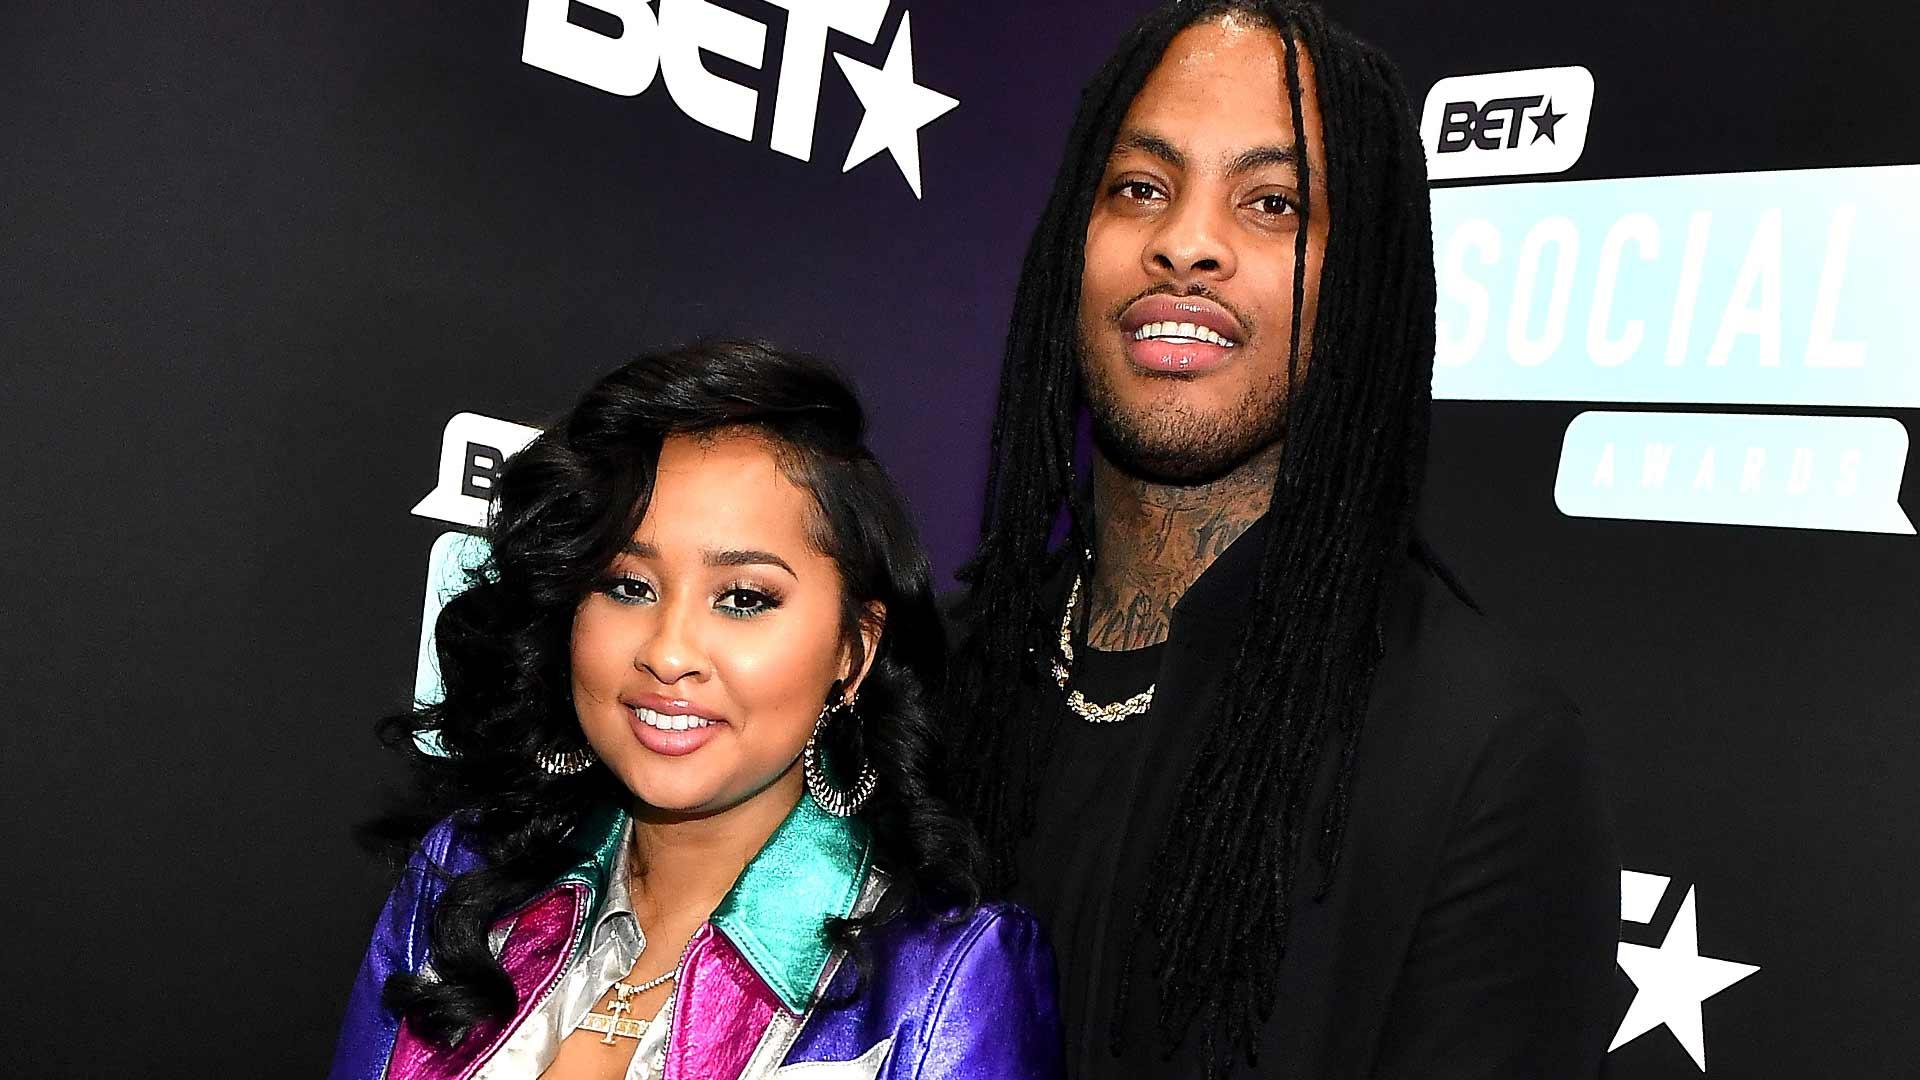 ‘Love and Hip Hop’ Star Waka Flocka Flame and Tammy Rivera Owe $35,000 in Back Taxes